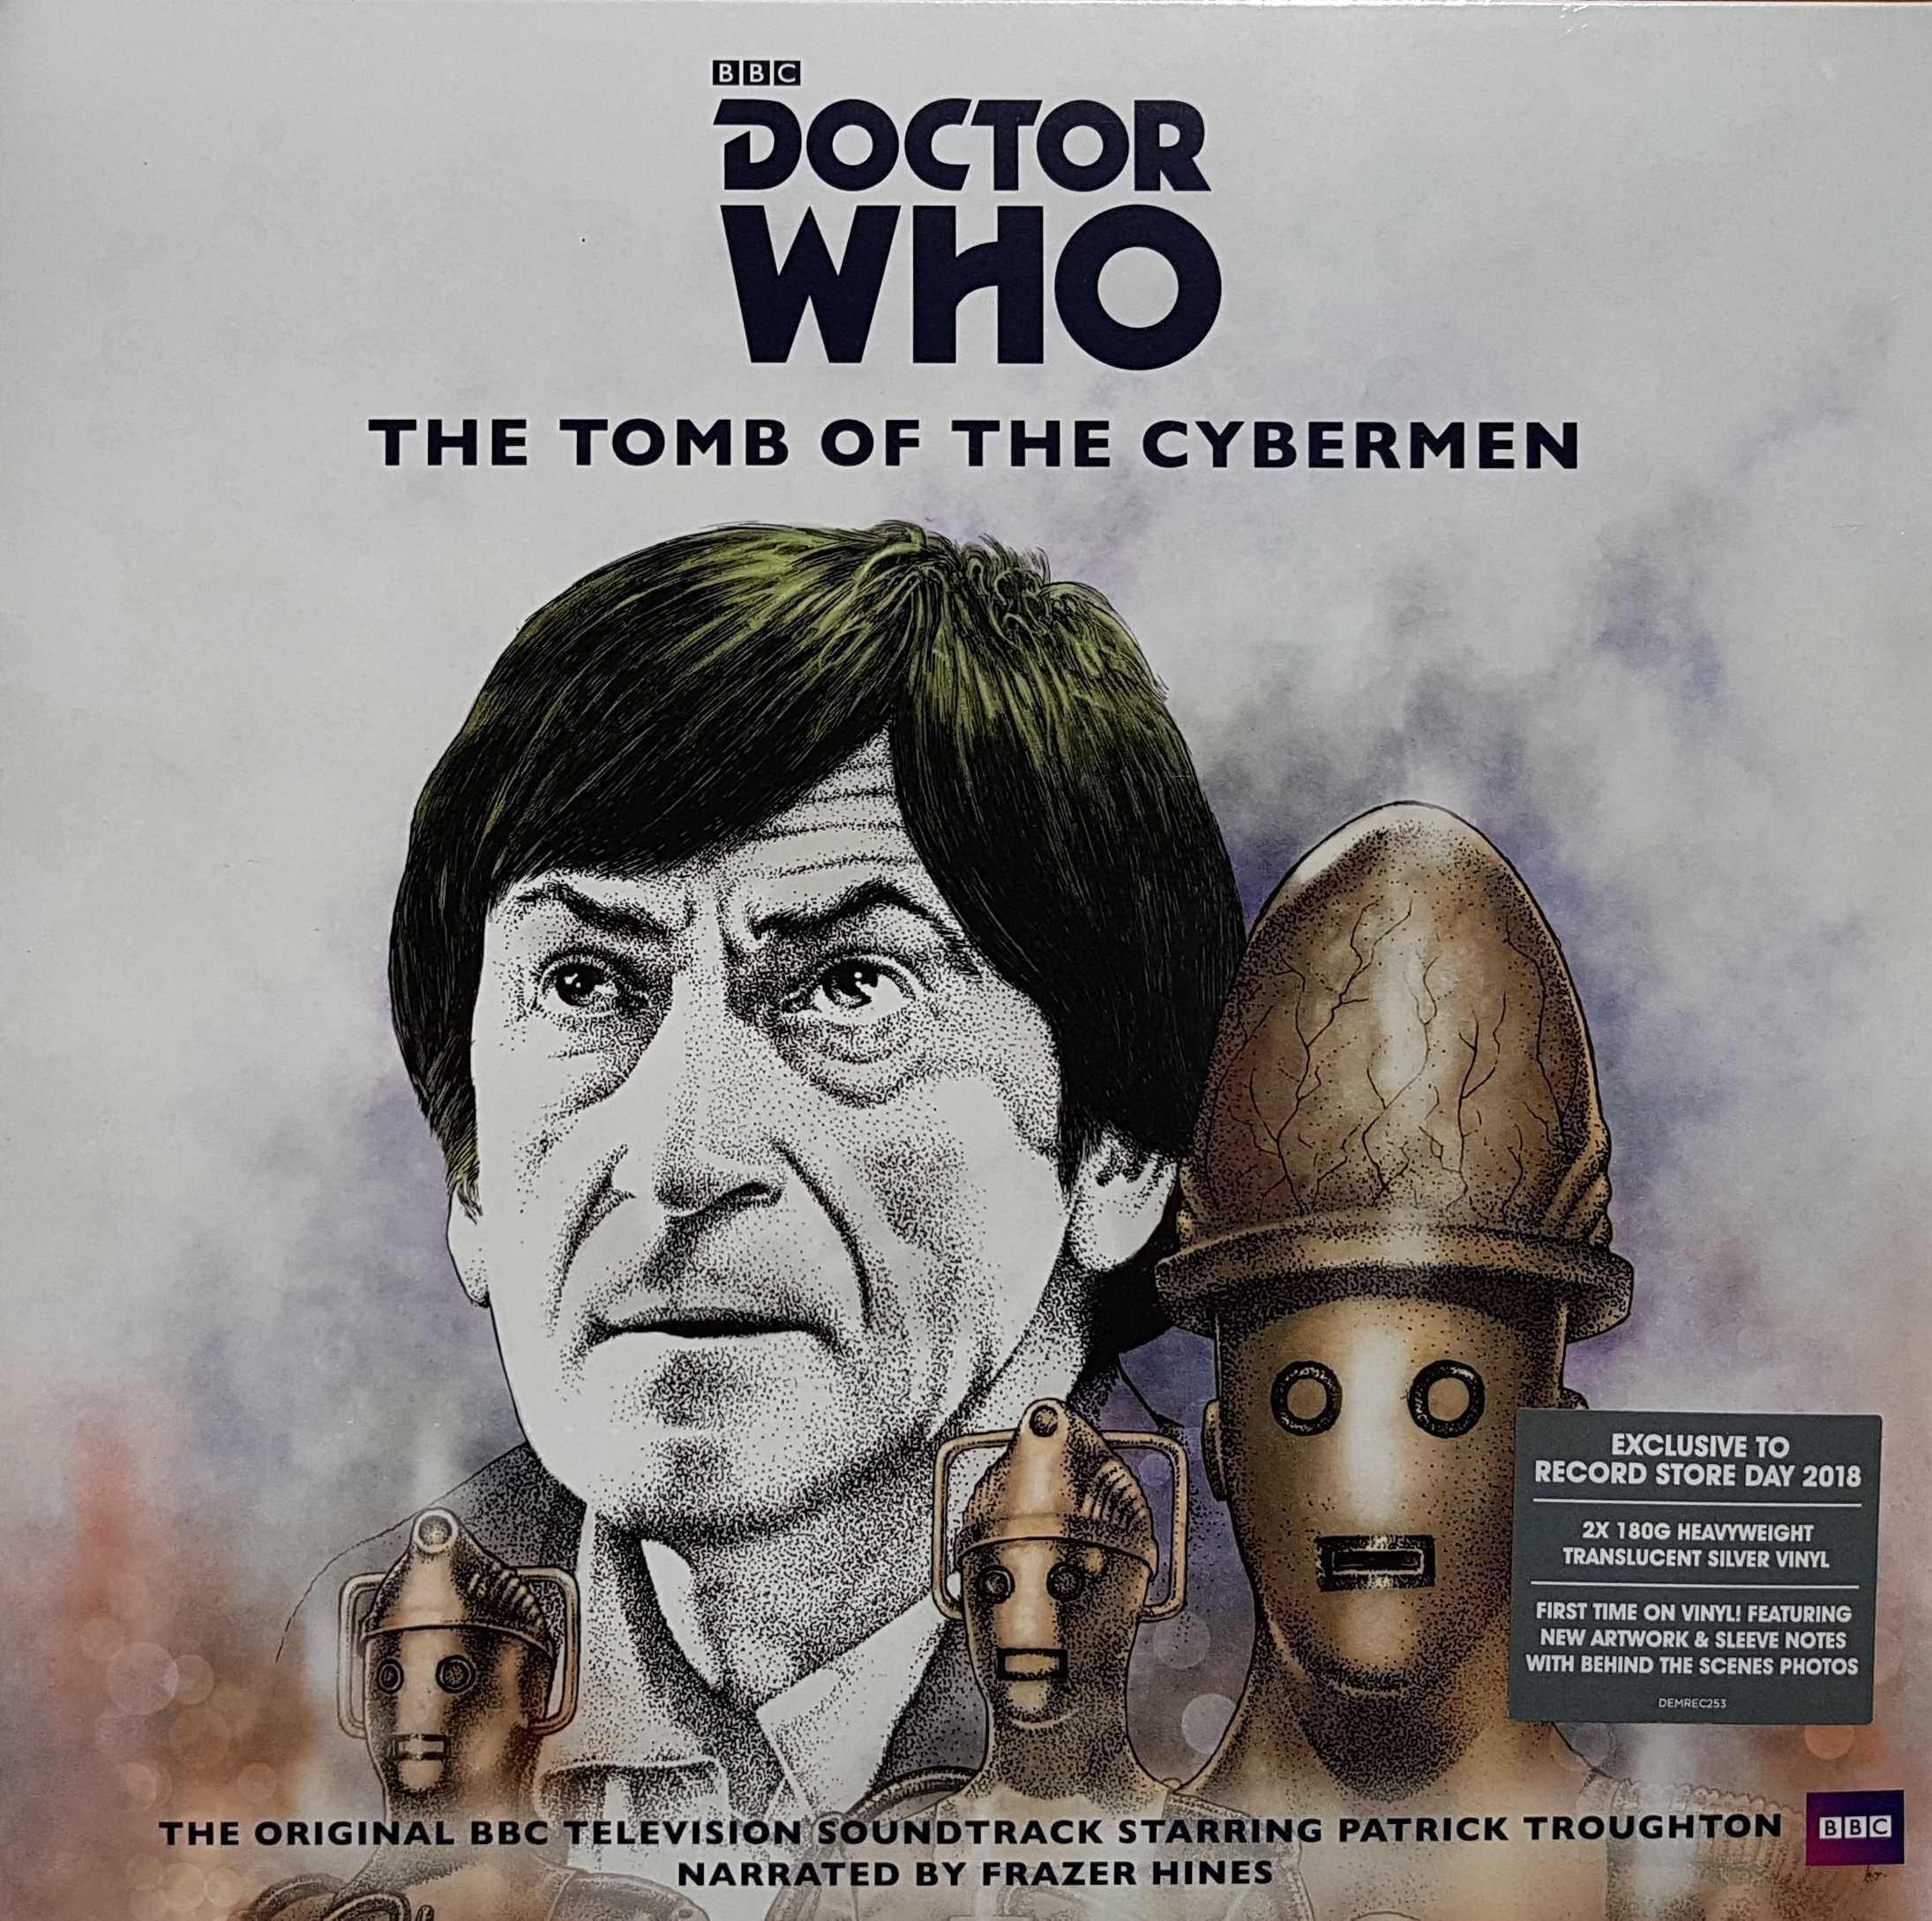 Picture of DEMREC 253 Doctor Who - The tomb of the Cybermen - Record Store Day 2018 by artist Kit Pedler / Gerry Davis from the BBC records and Tapes library